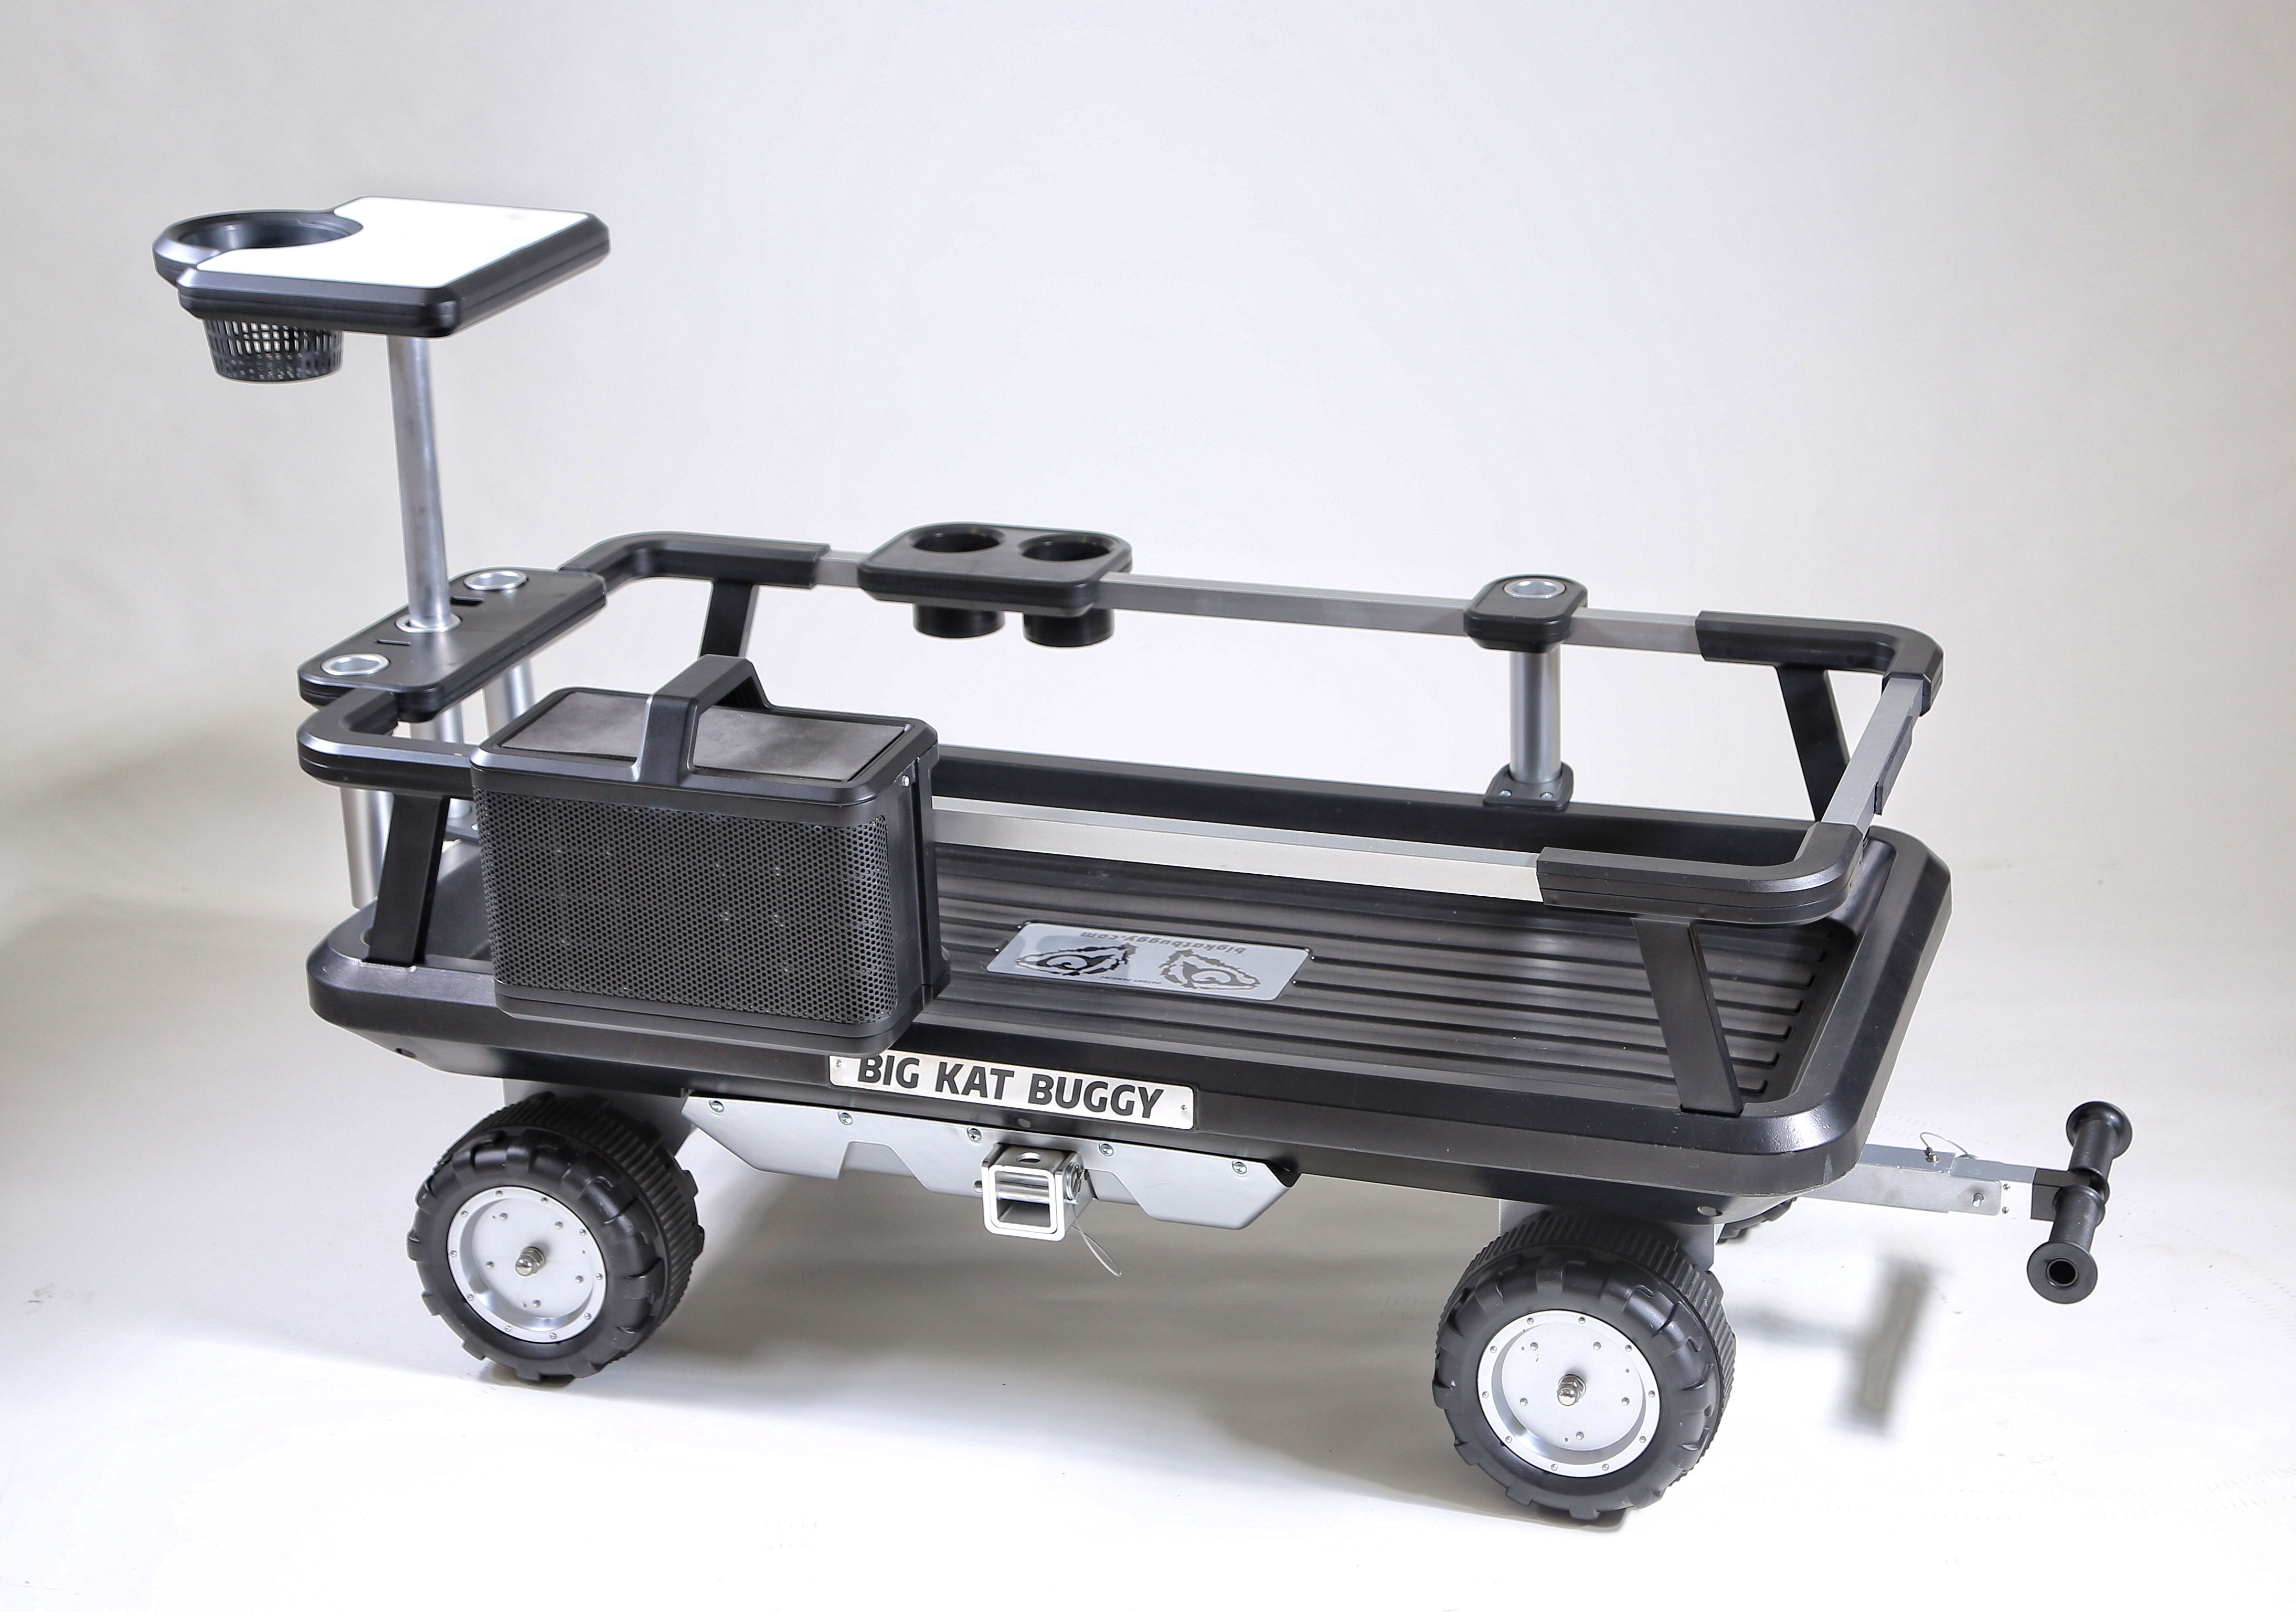 The Big Kat Buggy™ makes recreation hassle-free